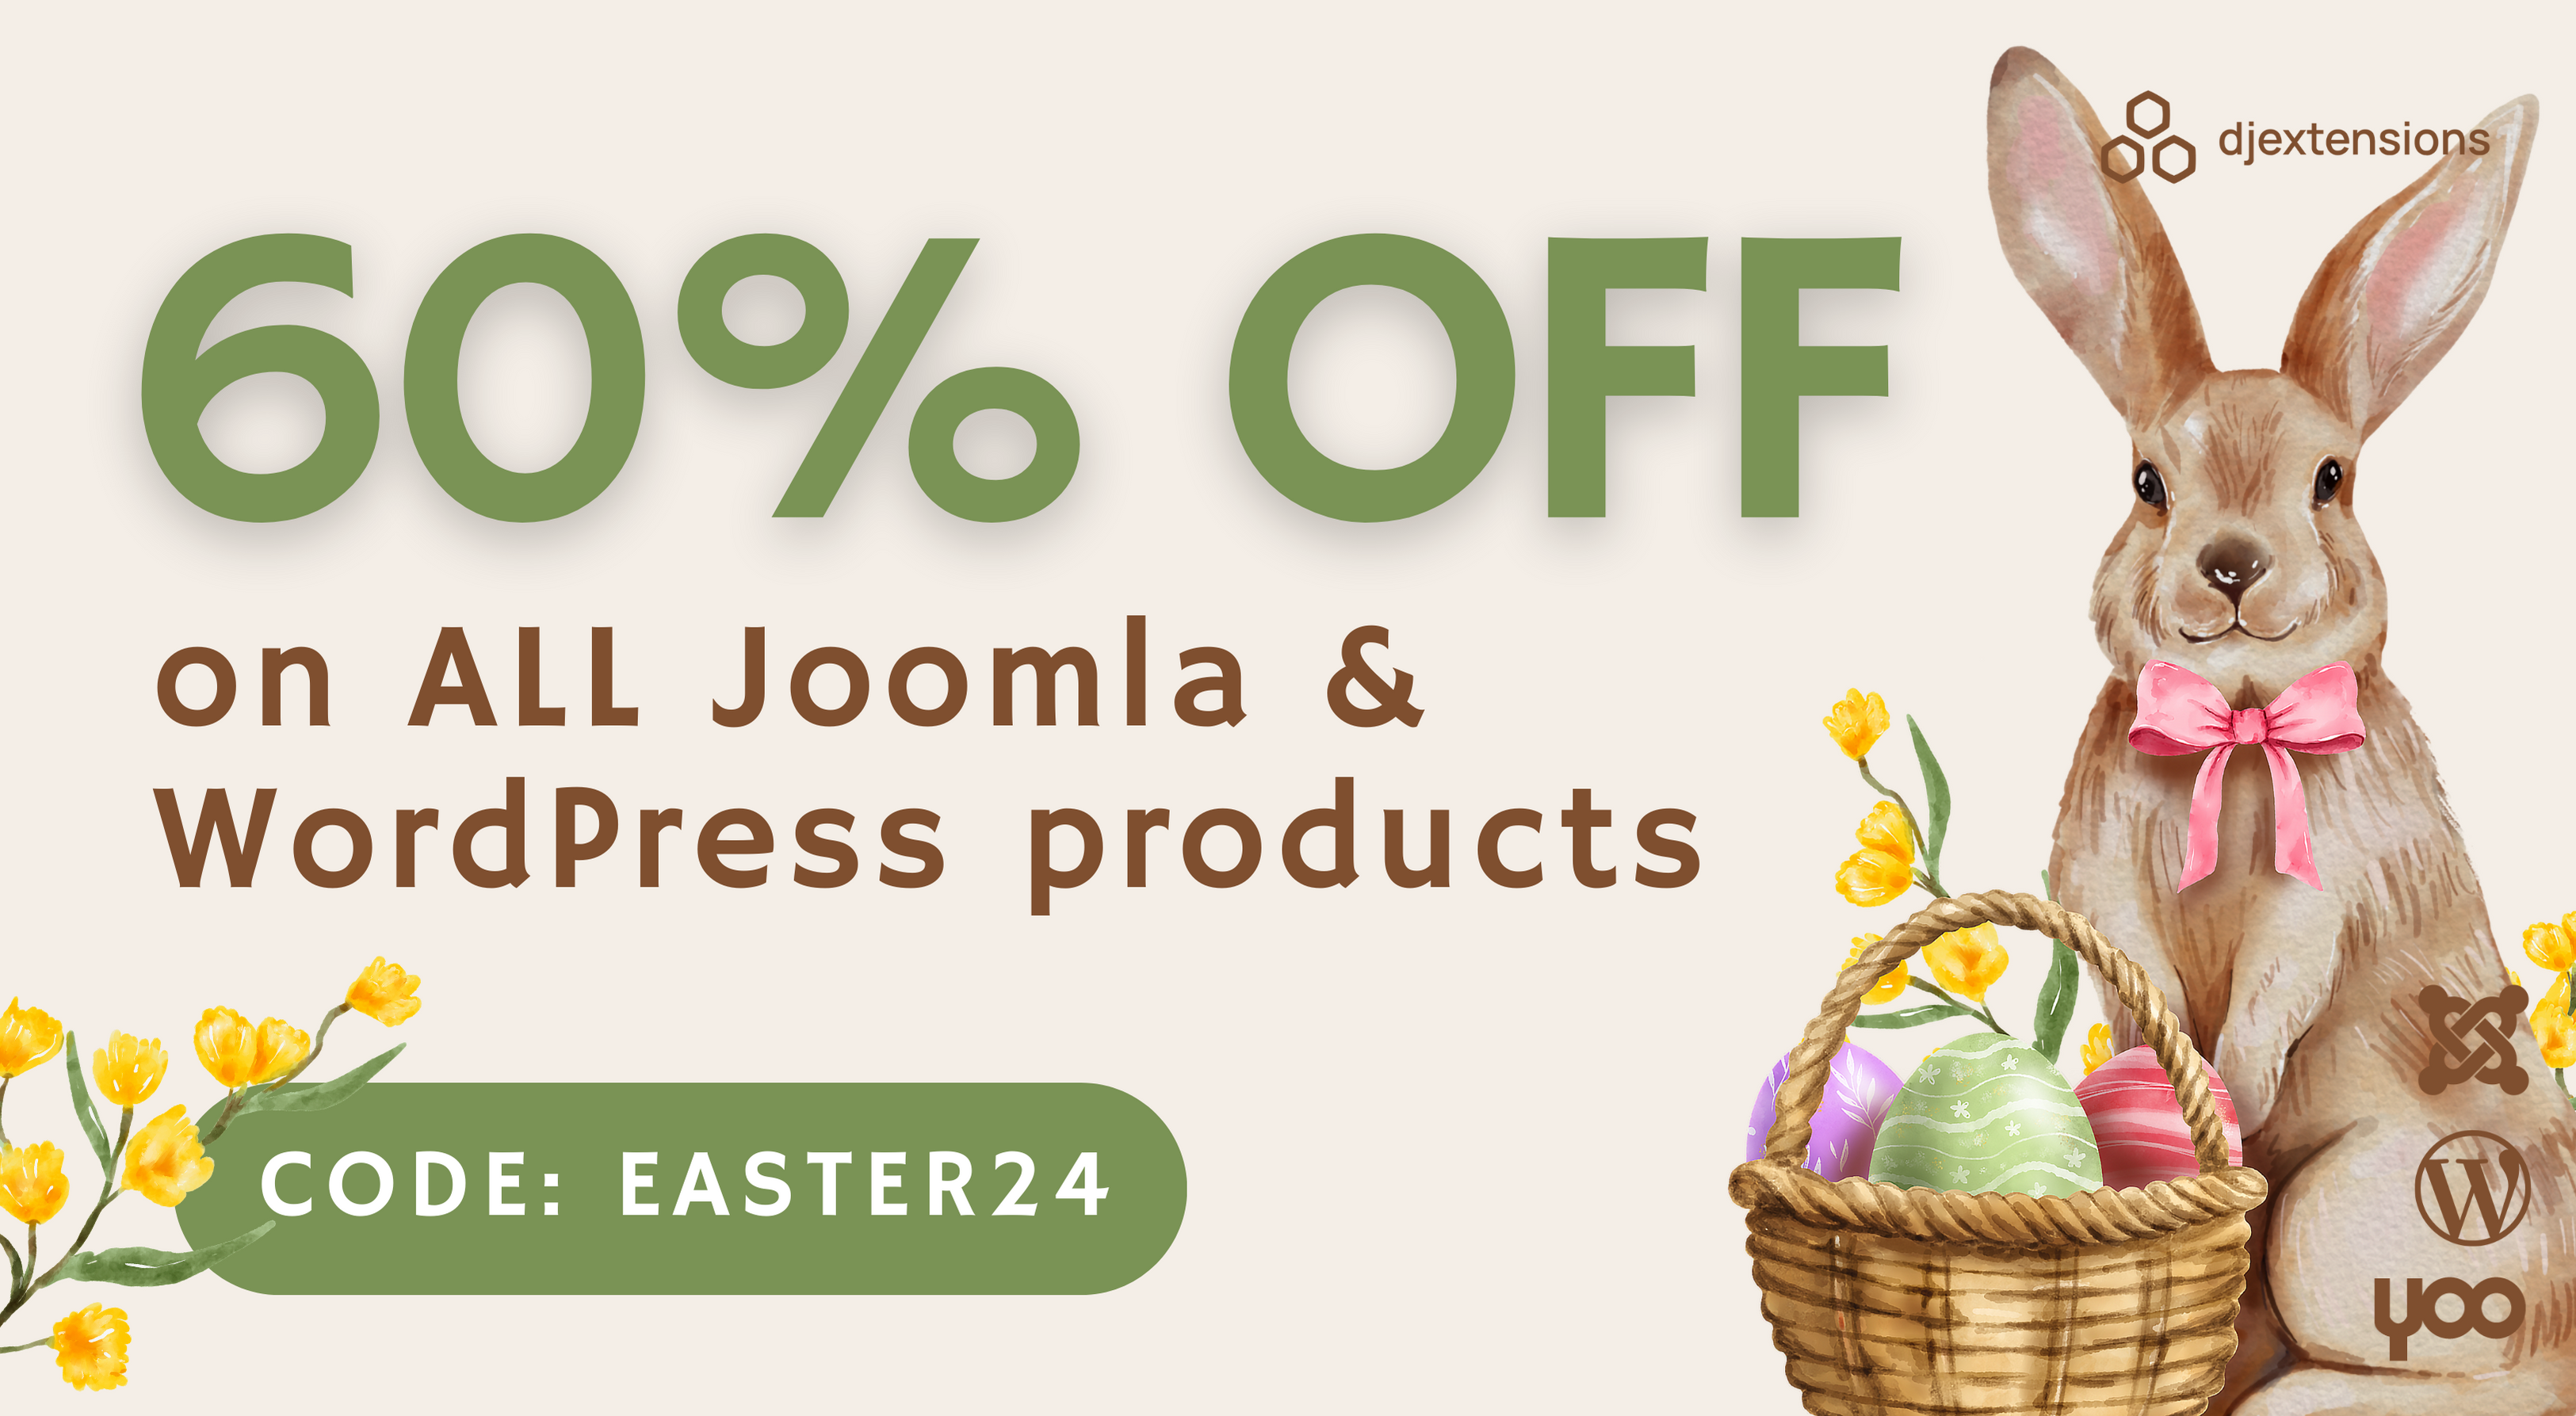 Spring into Savings! Enjoy a Whopping 60% Easter Discount on ALL Joomla & WordPress Products